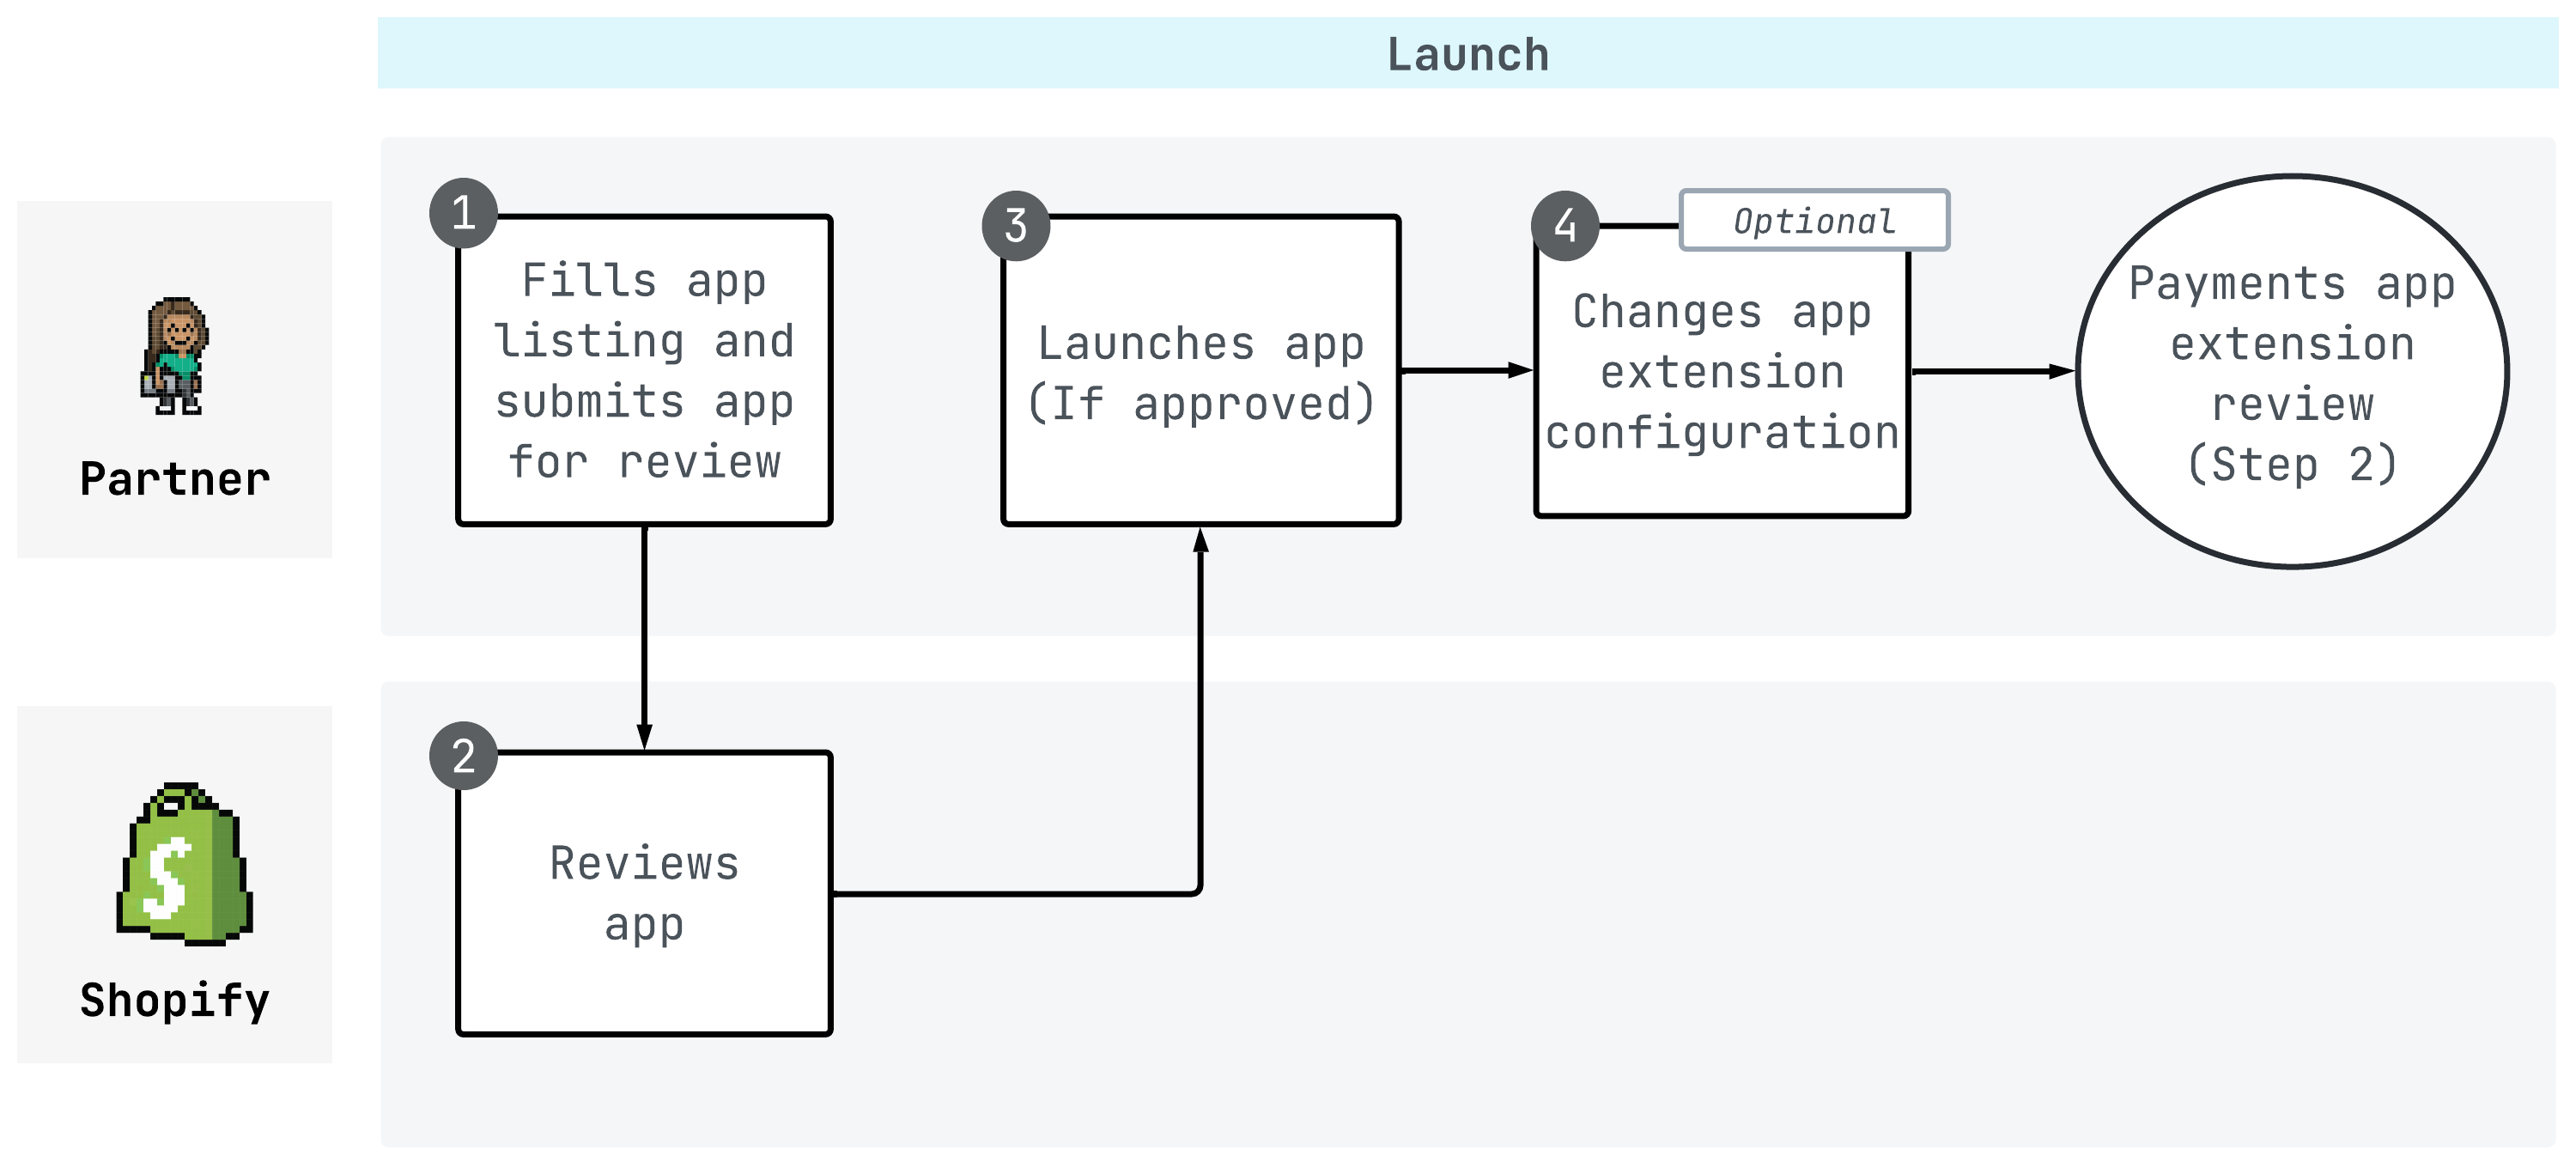 A flow chart of the payments app review process steps listed above